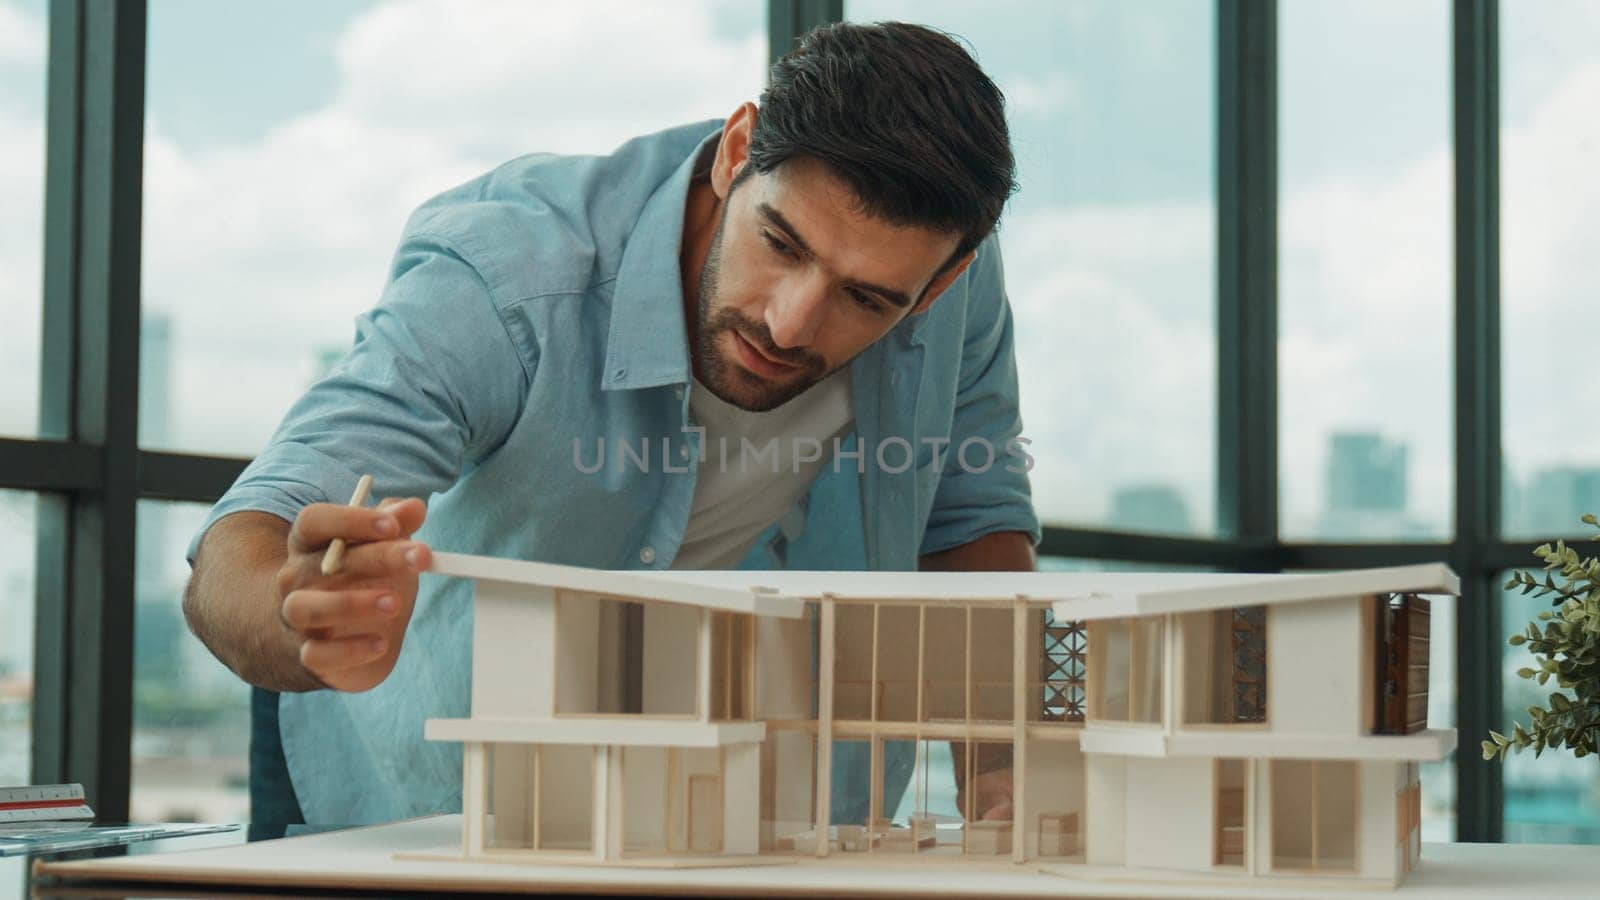 Smart civil architect engineer looking while planing design house construction with blueprint, house model and architectural equipment. Designer measuring and inspecting house model. Tracery